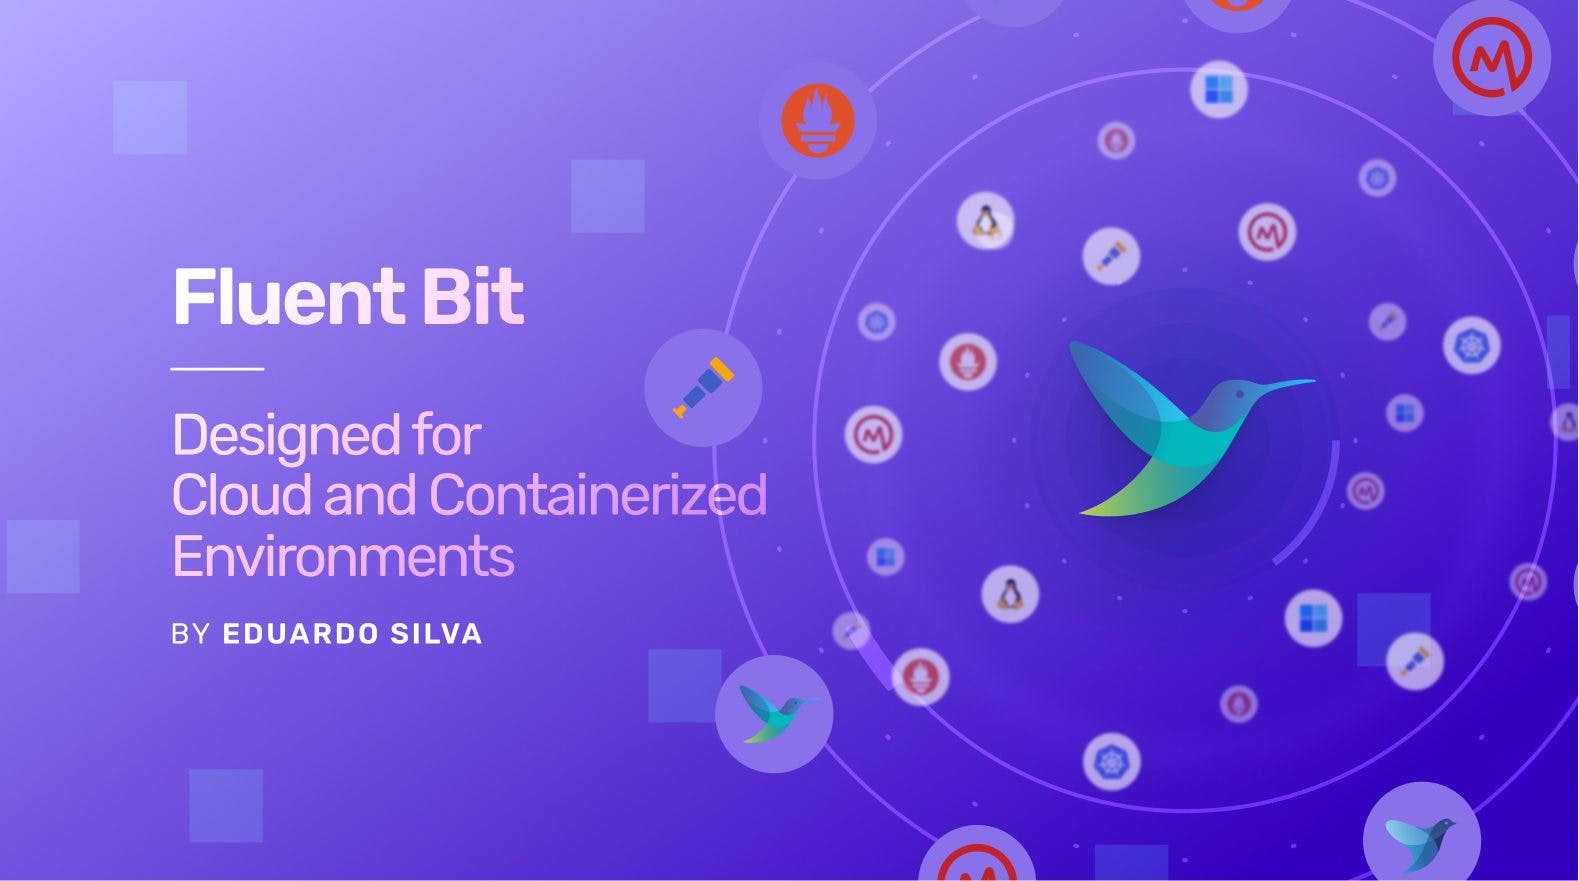 Fluent Bit - Designed for Cloud and Containerized Environments